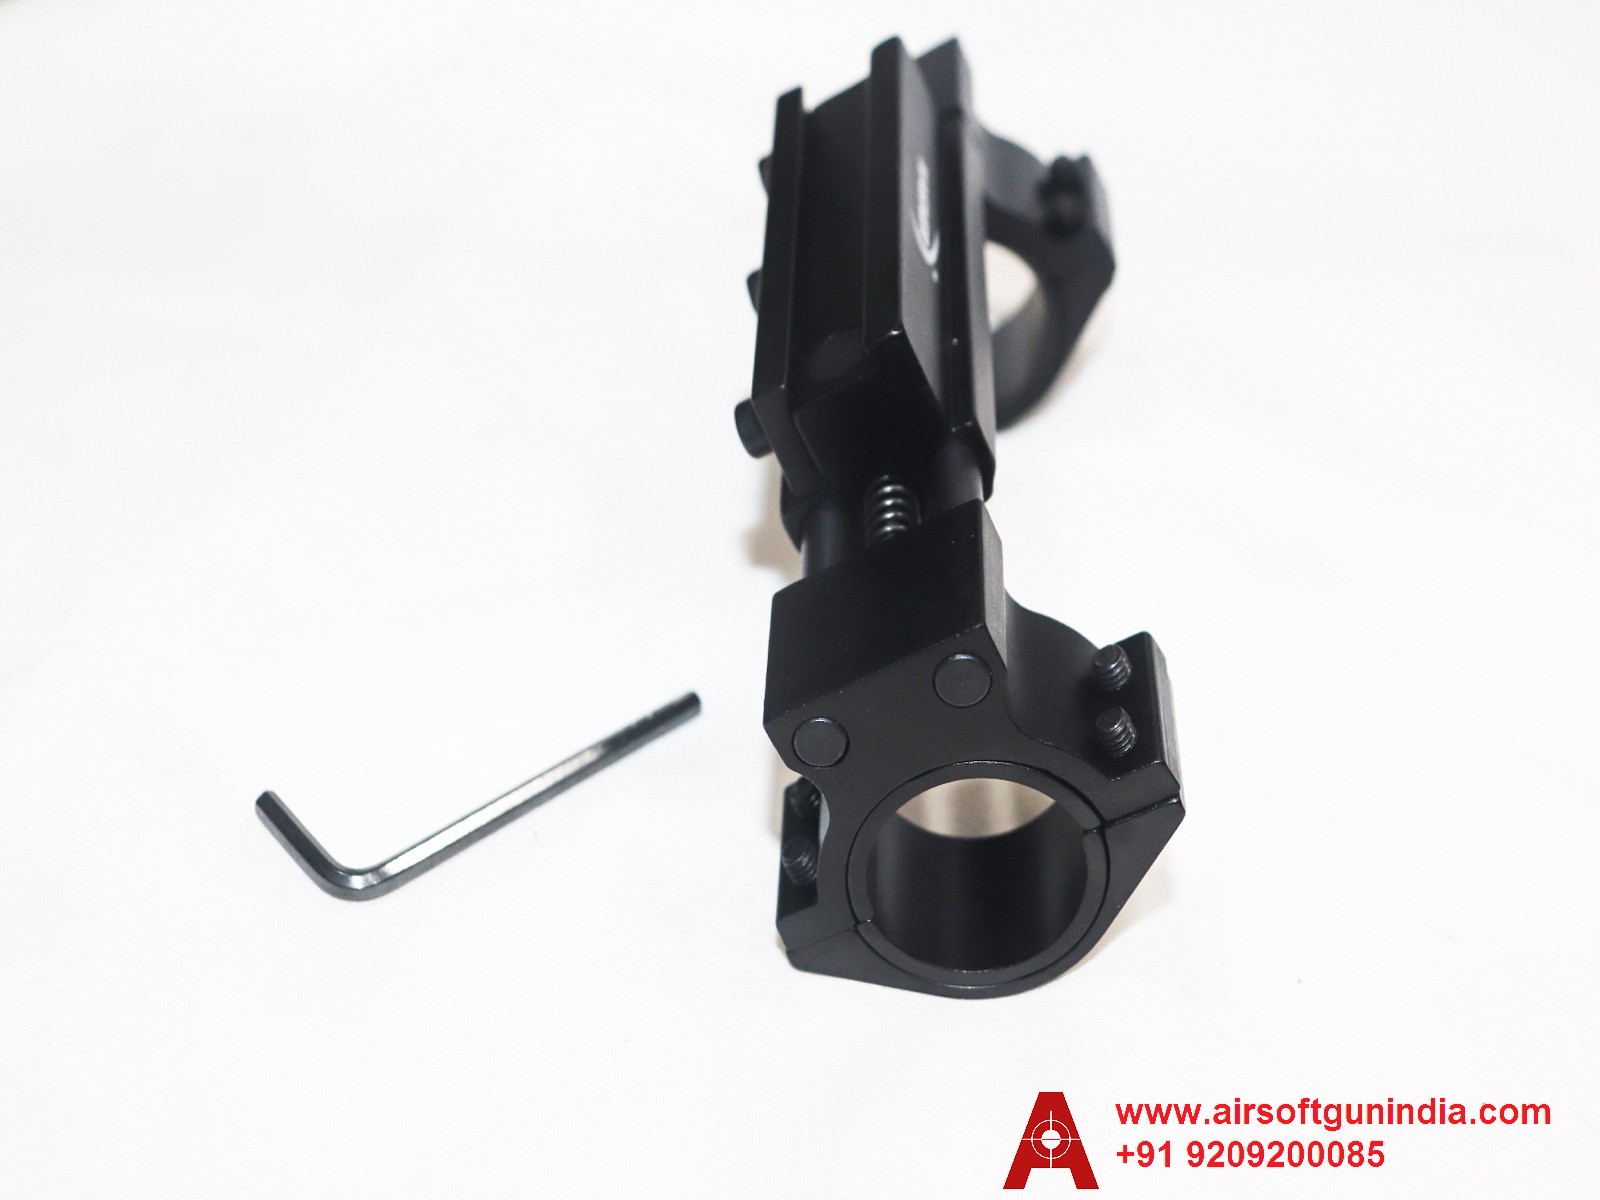 WAGNER Zero Recoil Pro Mount By Airsoft Gun India